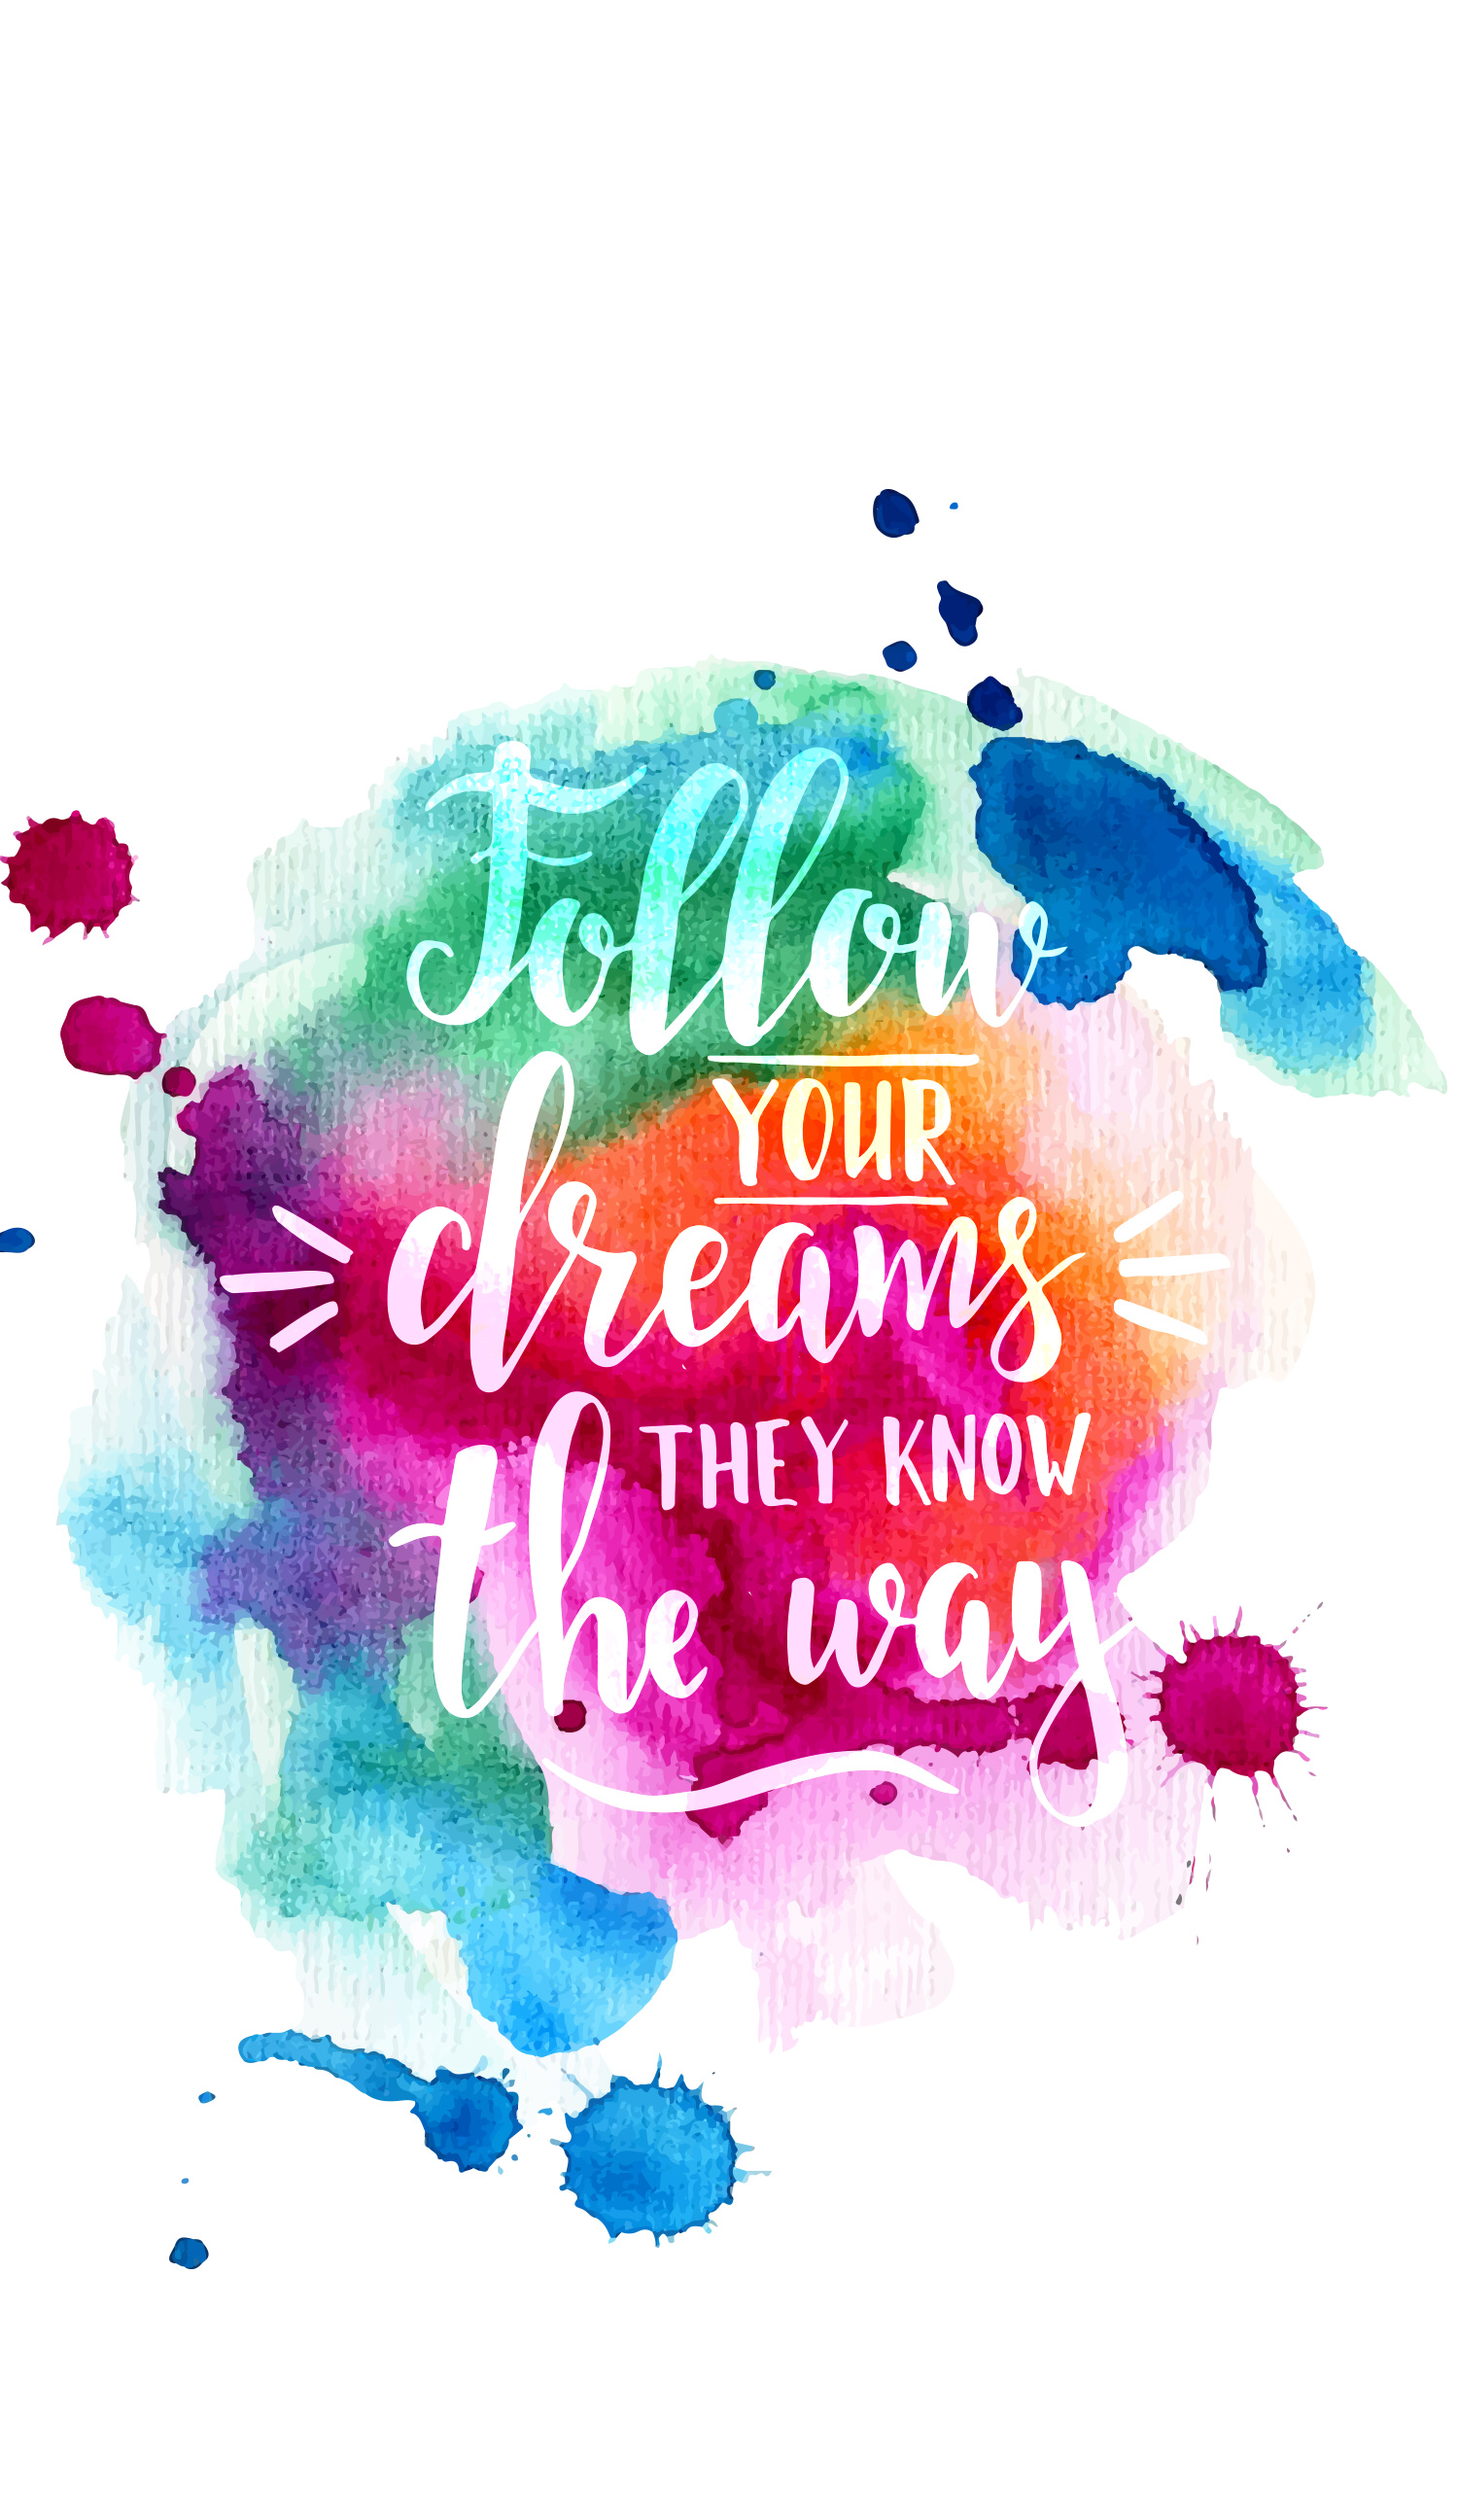 Follow your dreams they know the way. Wallpaper iphone quotes, Wallpaper quotes, Dream quotes